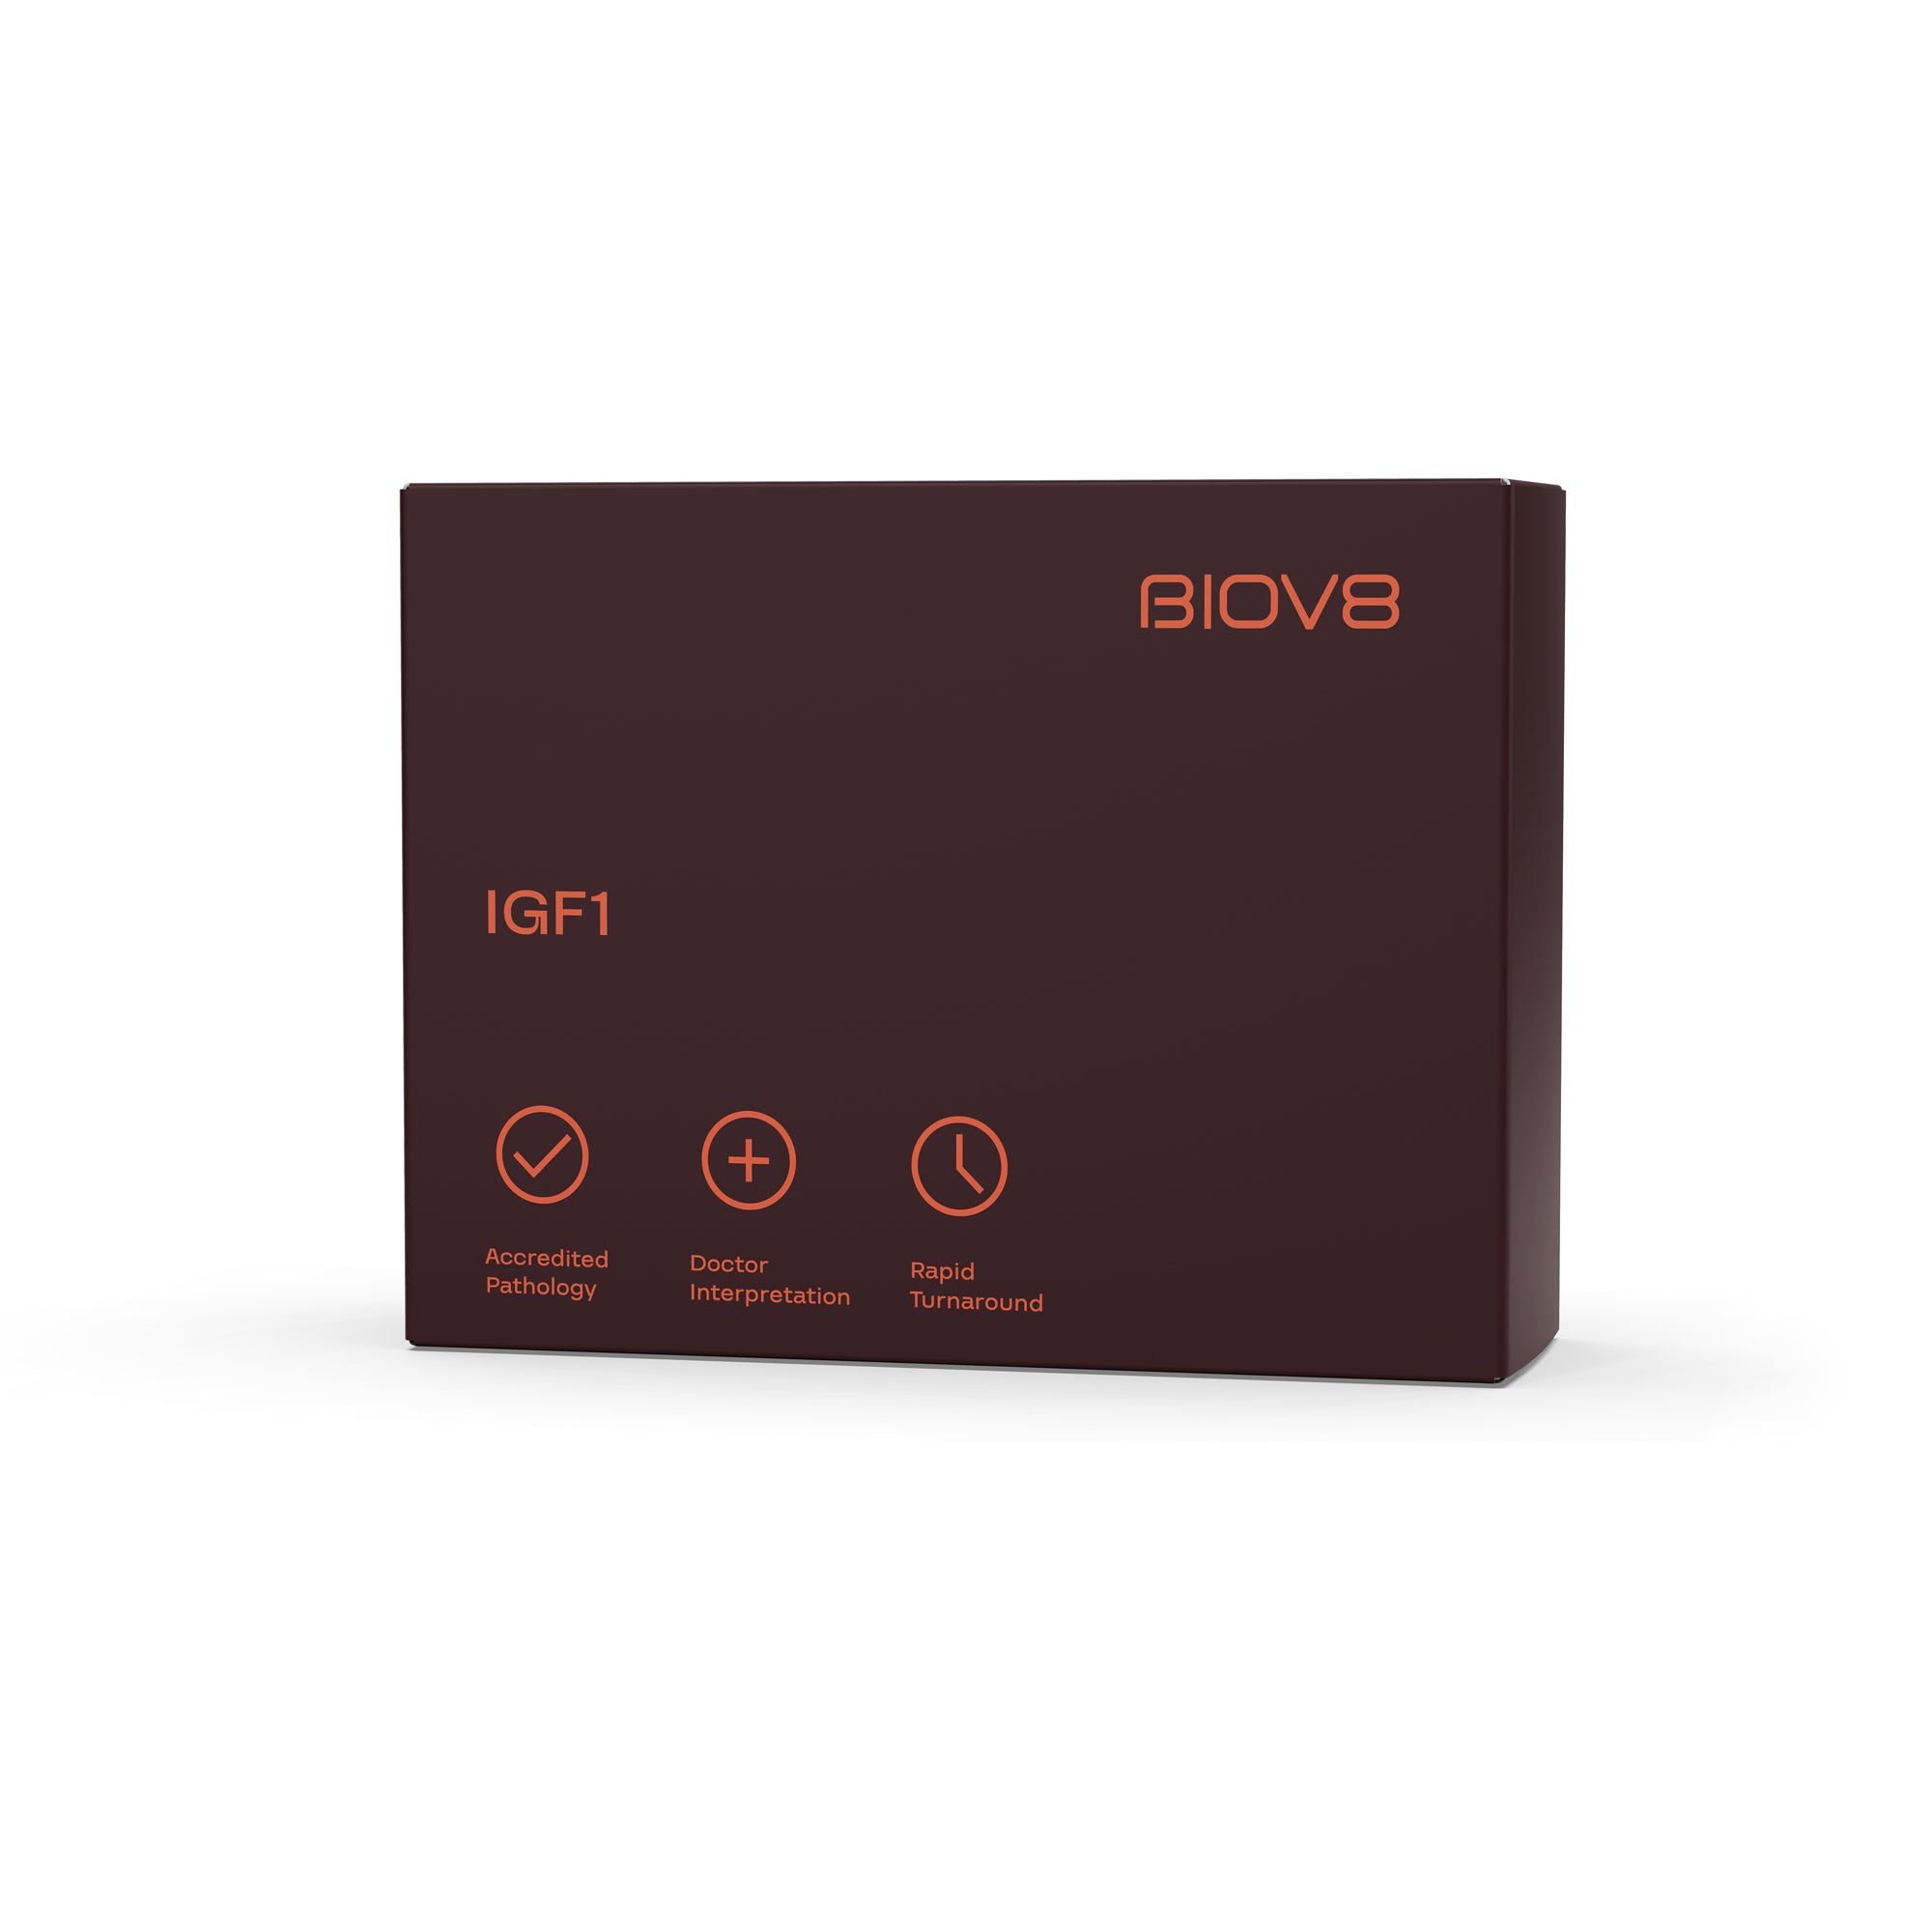 Biov8's product A0024 for blood work analysis